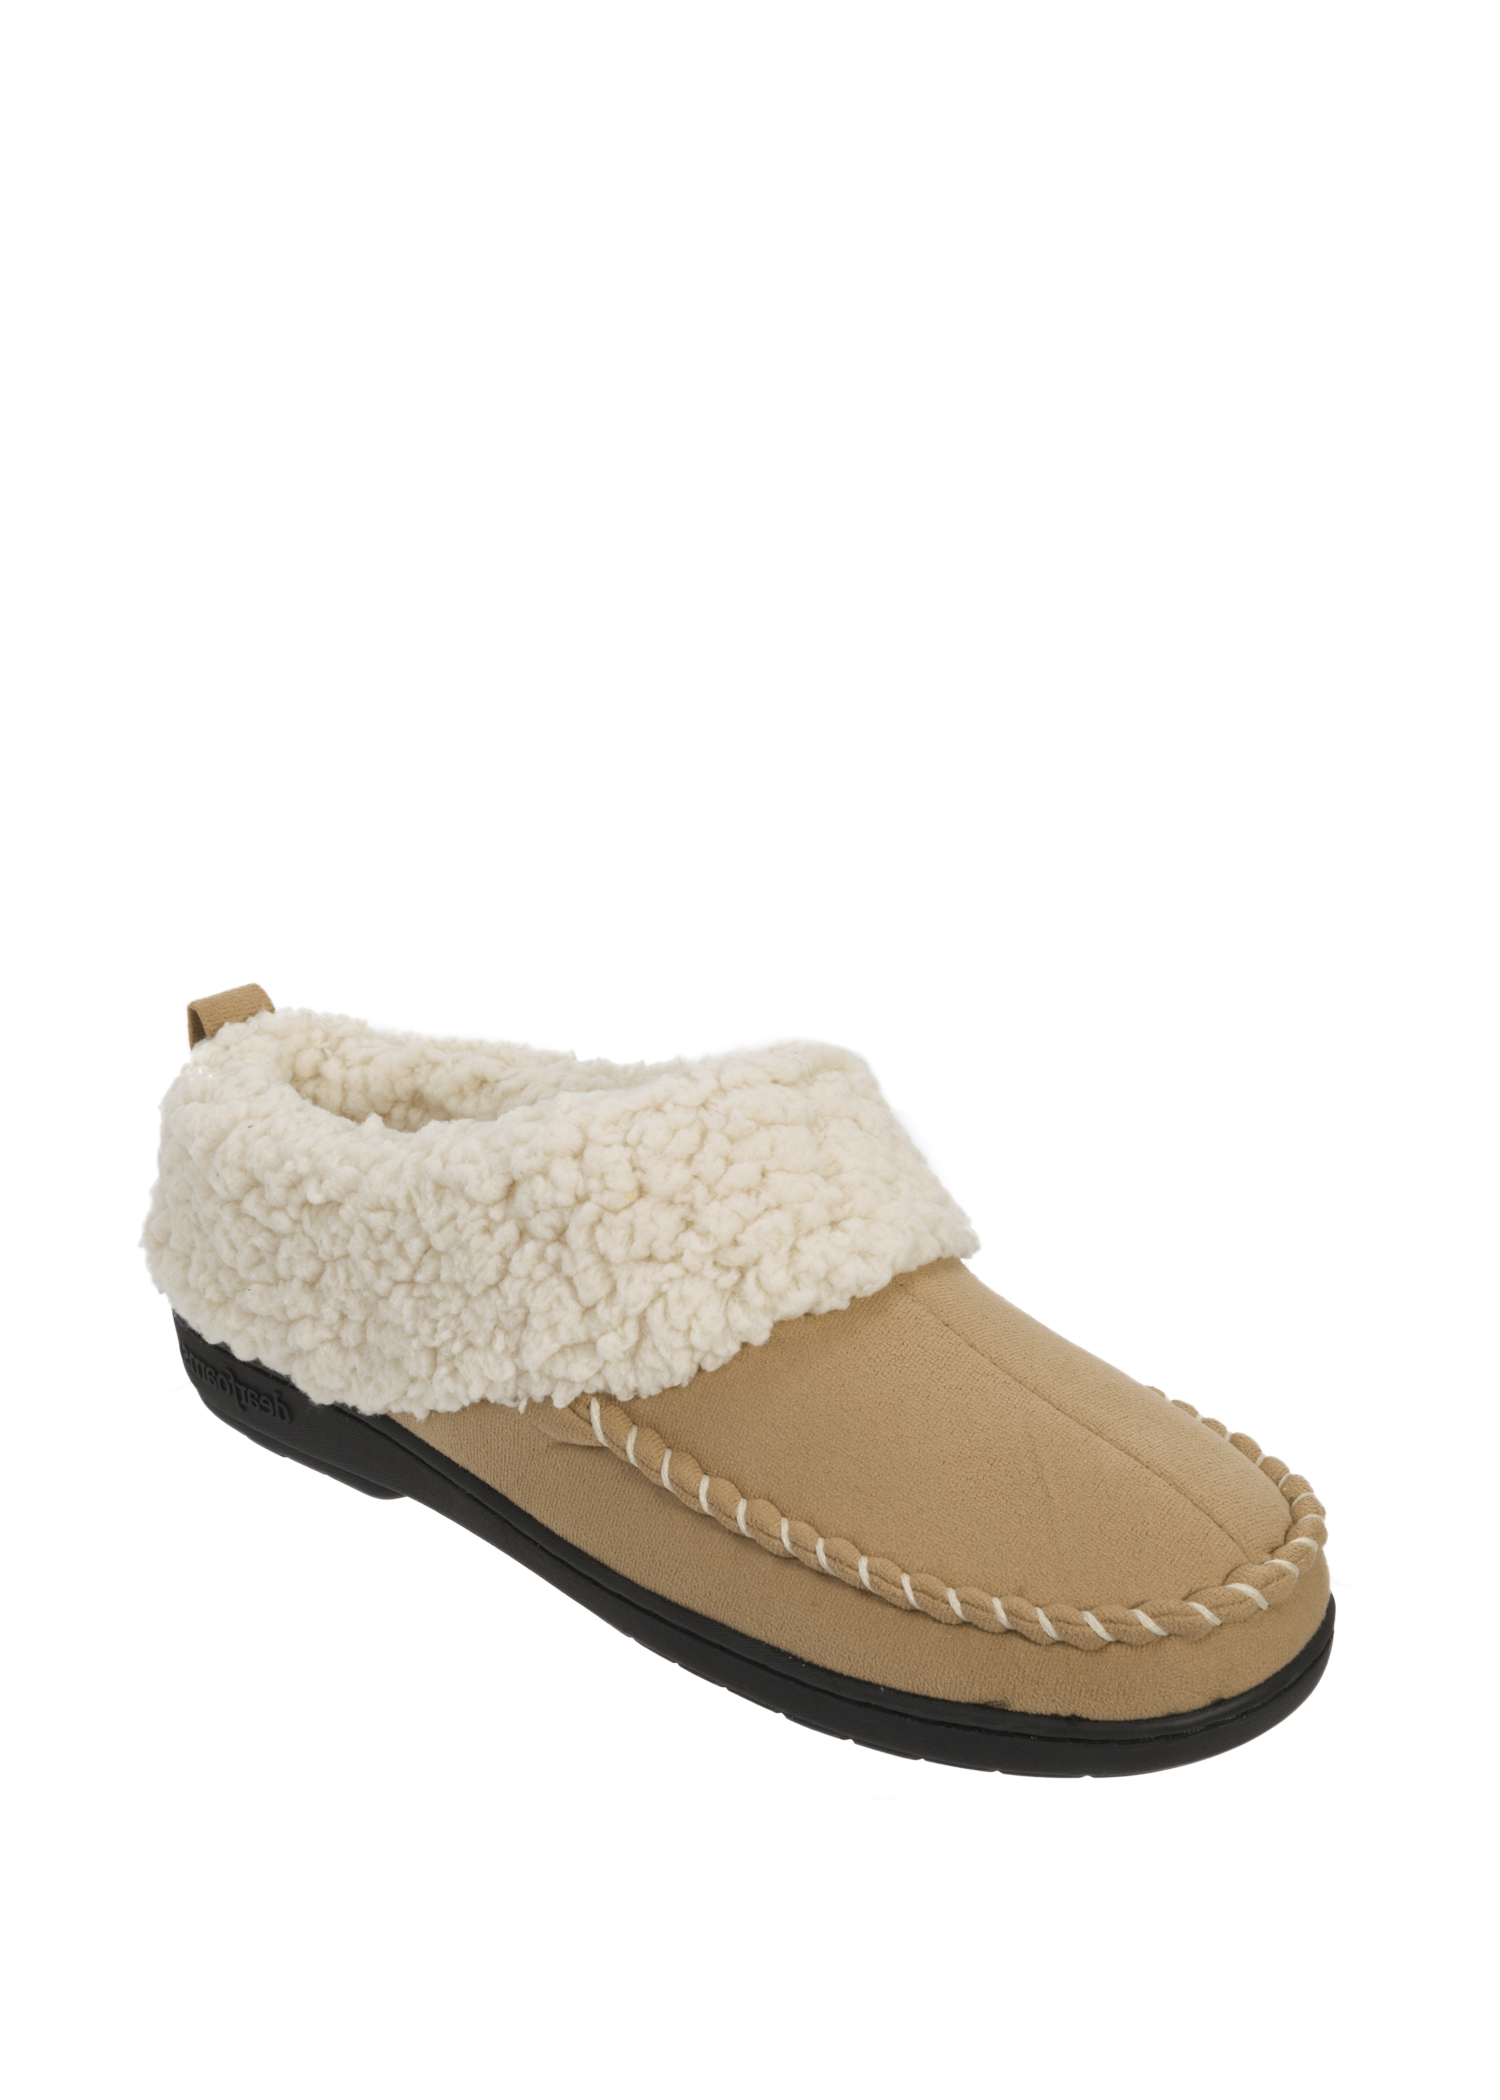 Dearfoams Women&#39;s Microsuede Clog Slipper with Whipstitch Tab and Memory Foam